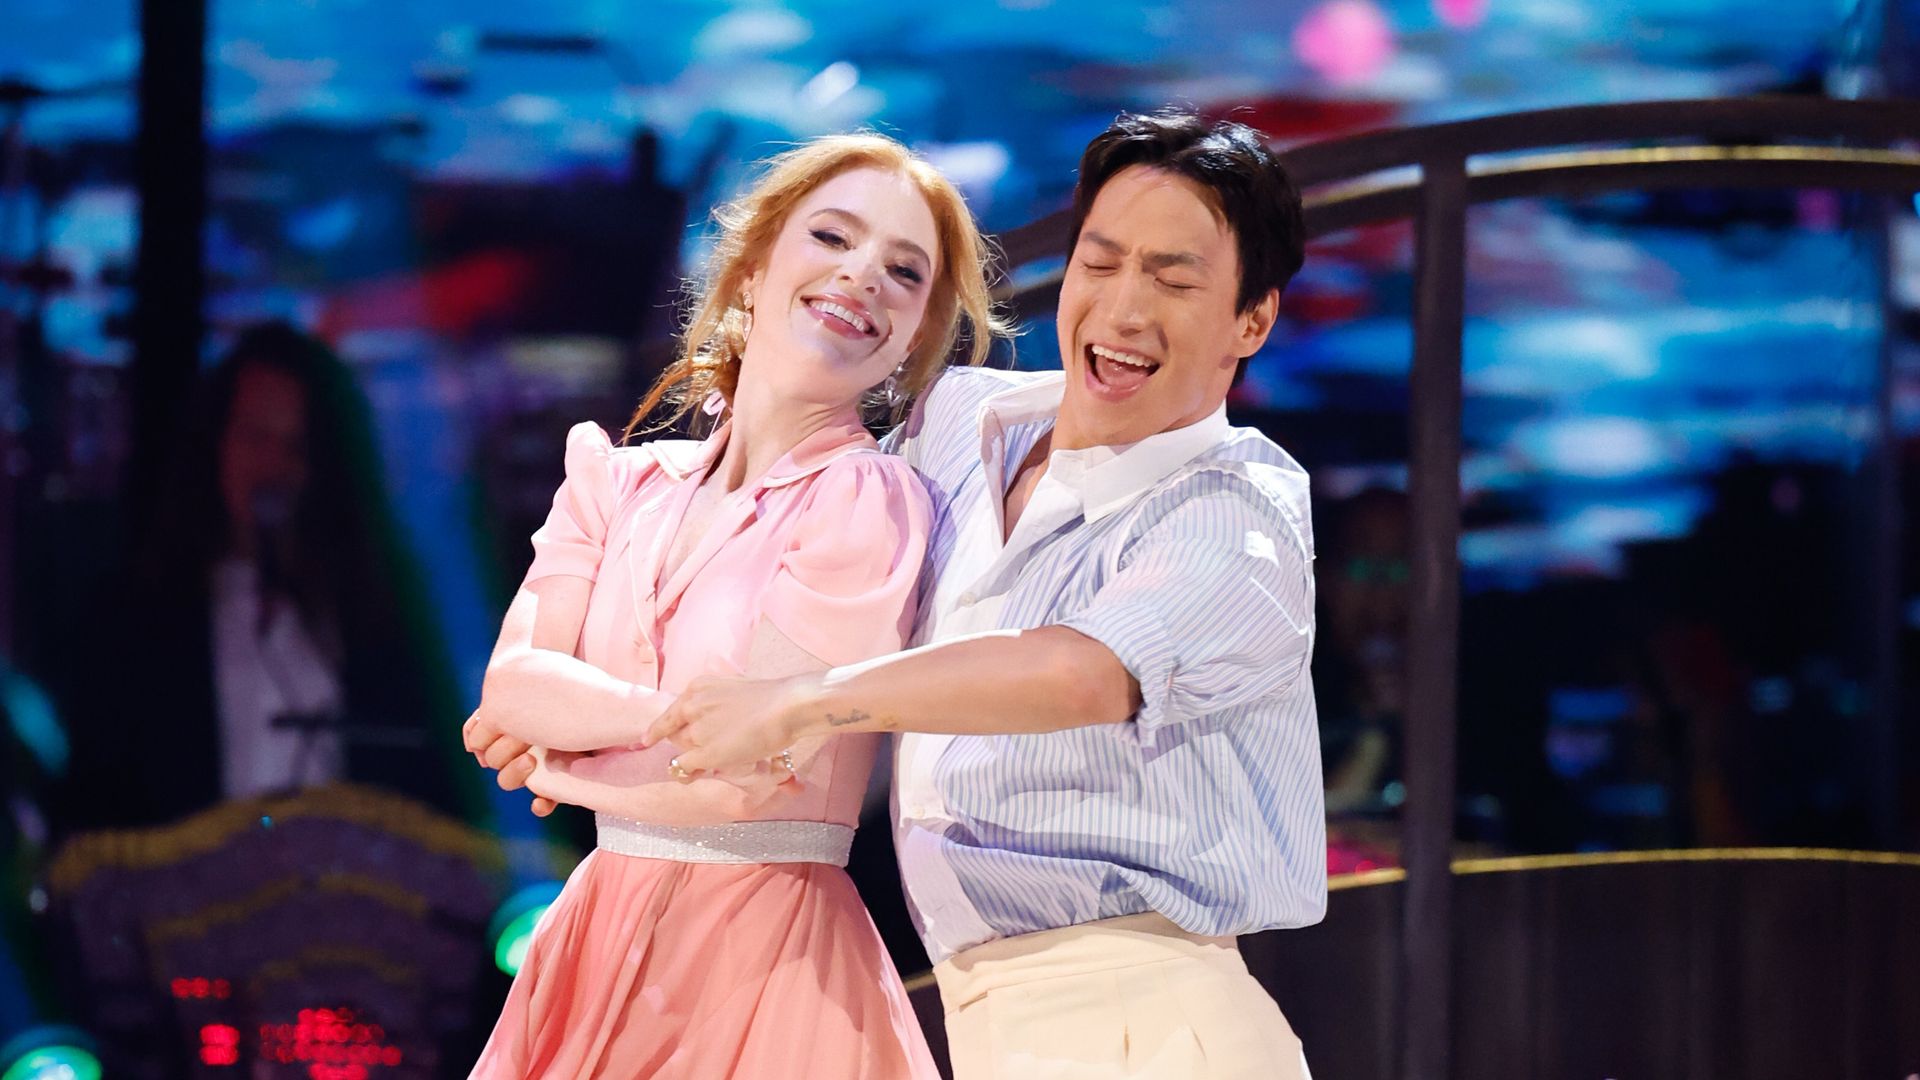 Angela Scanlon and Carlos Gu dancing the America Smooth on Strictly Come Dancing 